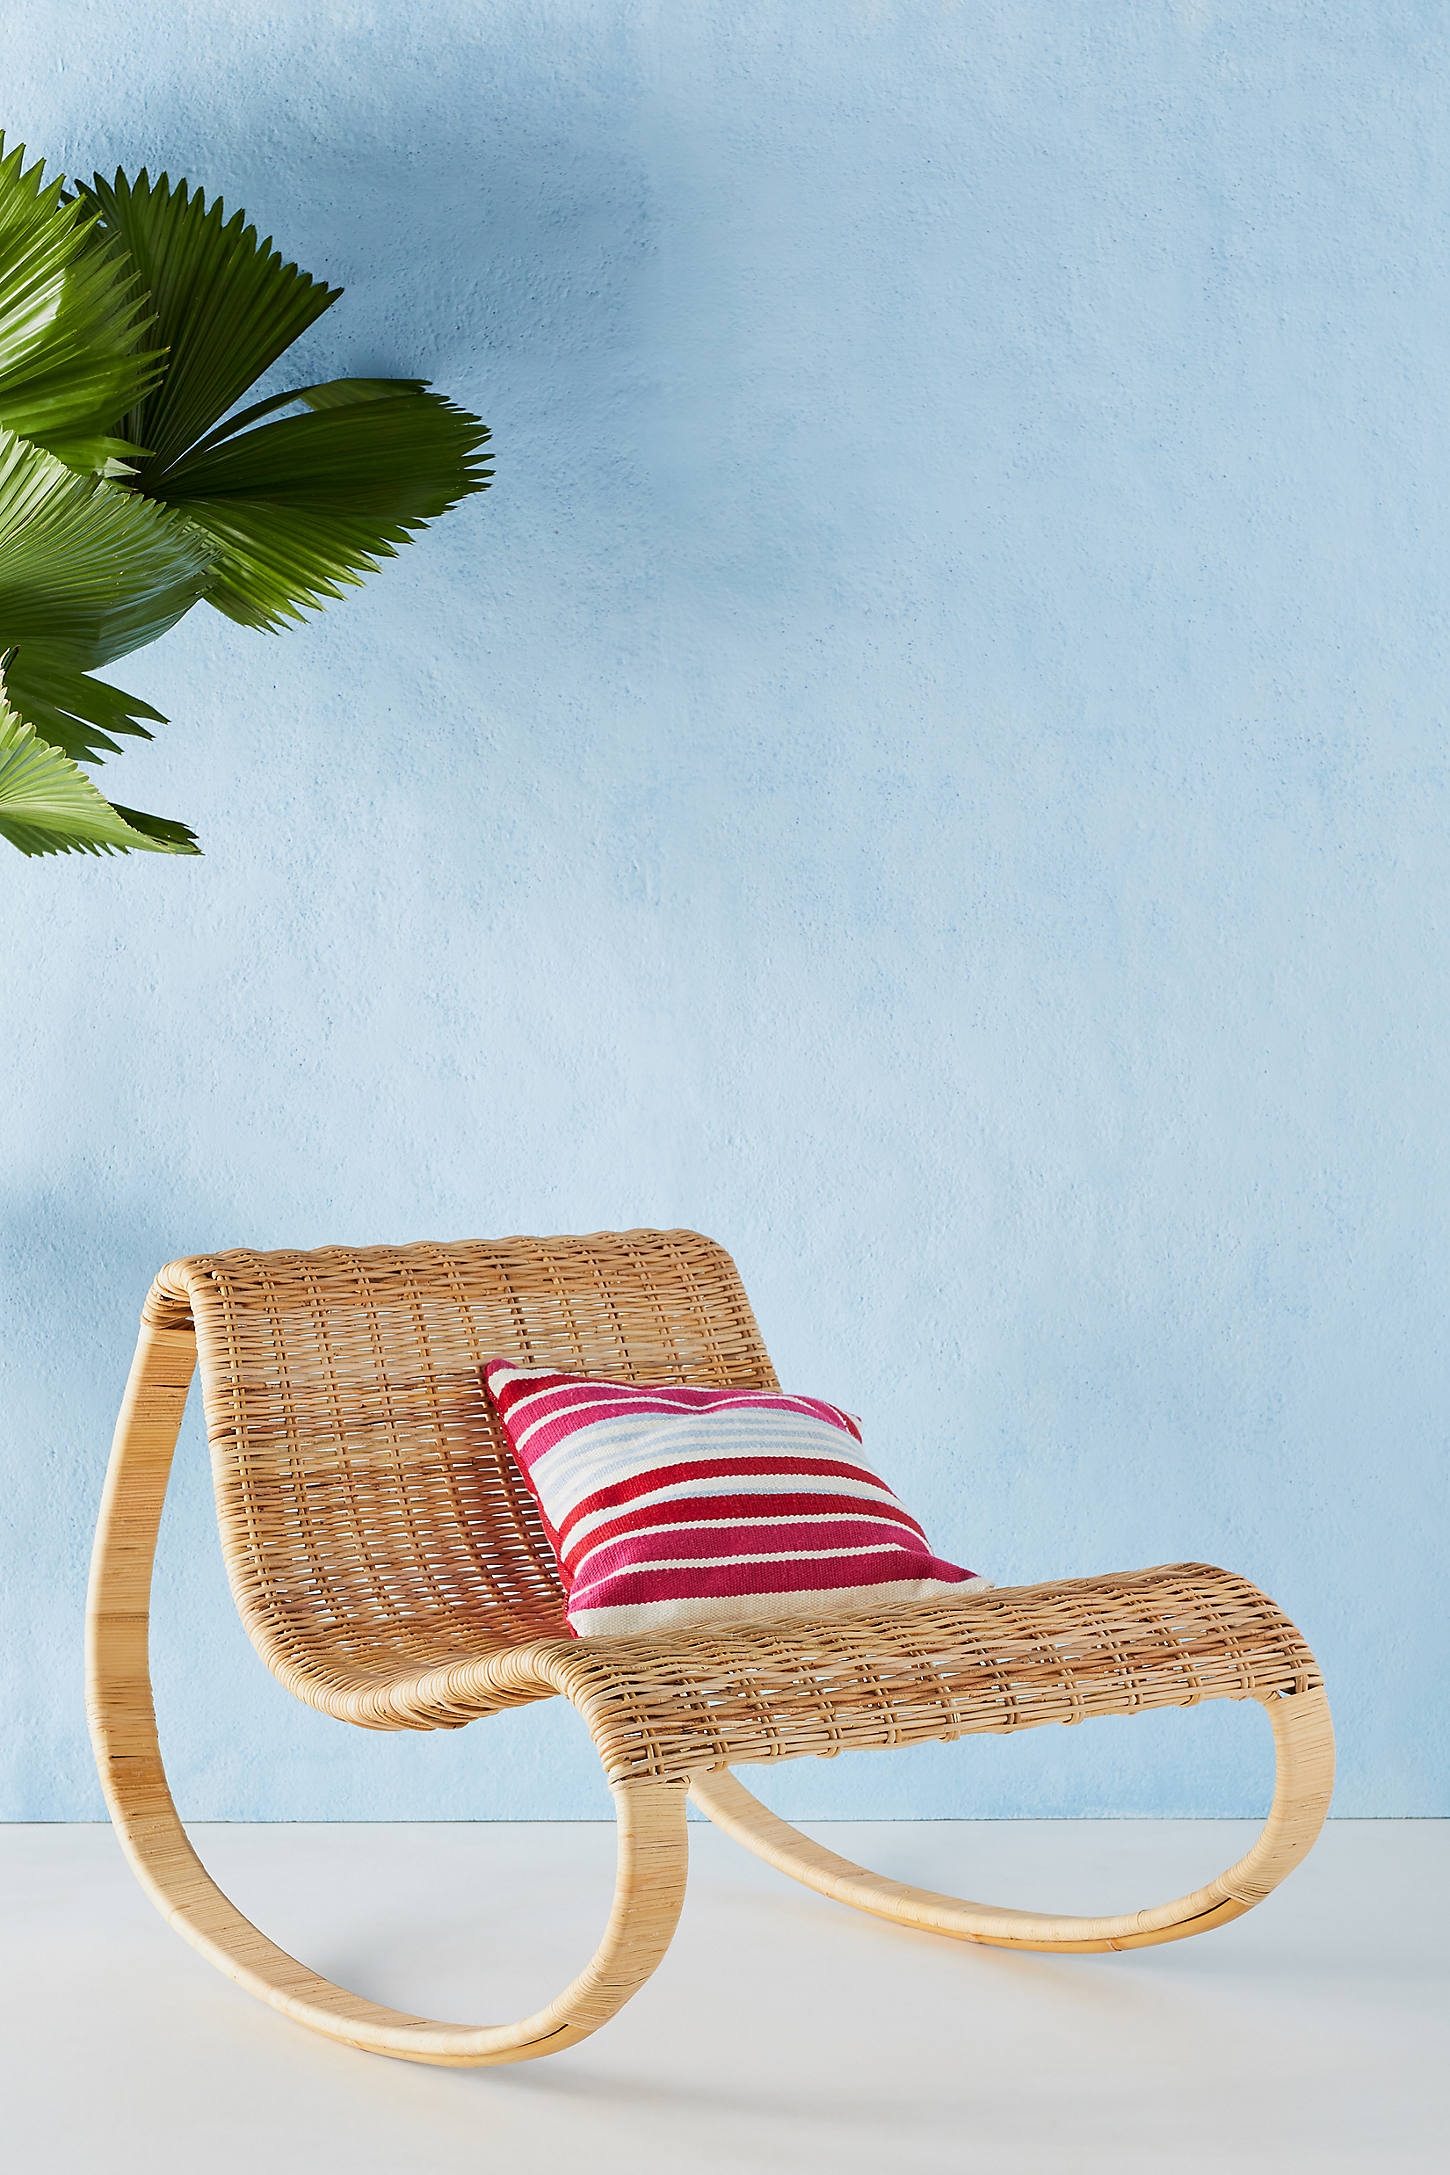 Rattan Rocking Chair By Anthropologie in Beige - Image 0